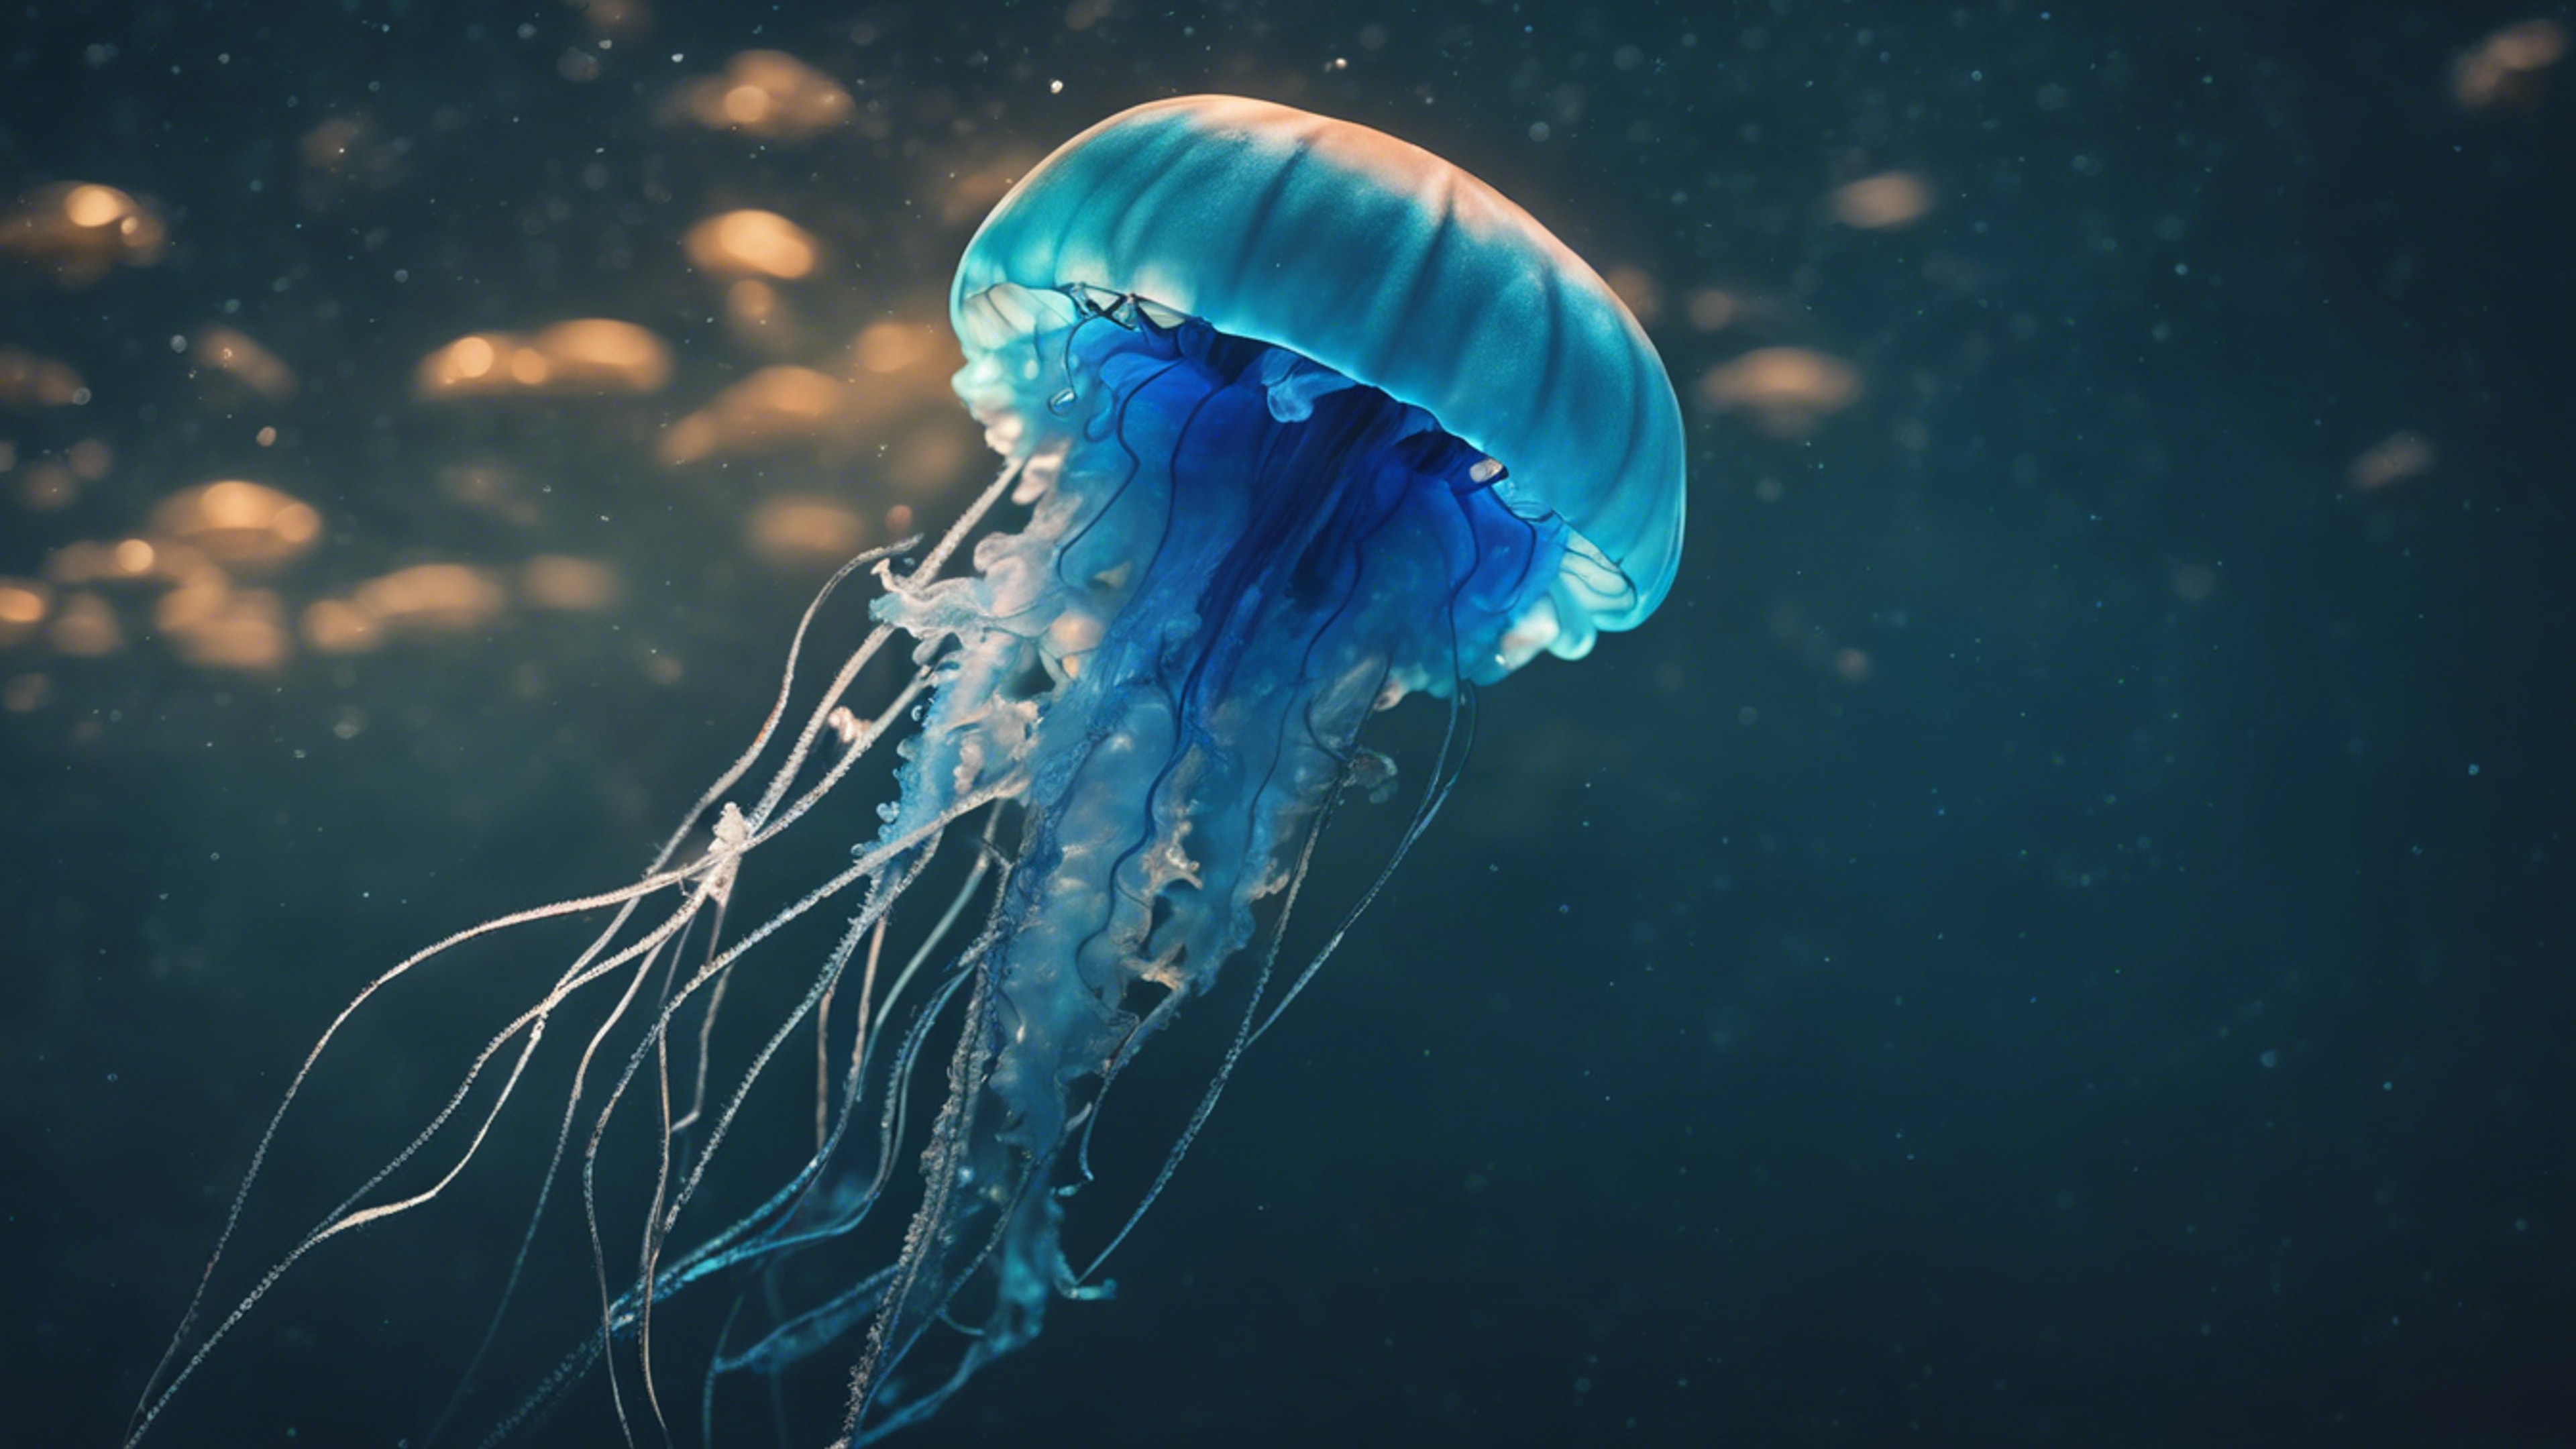 A neon blue jellyfish gracefully floating in the dark ocean depths. Kertas dinding[de52a1967abe4ca3a1c8]